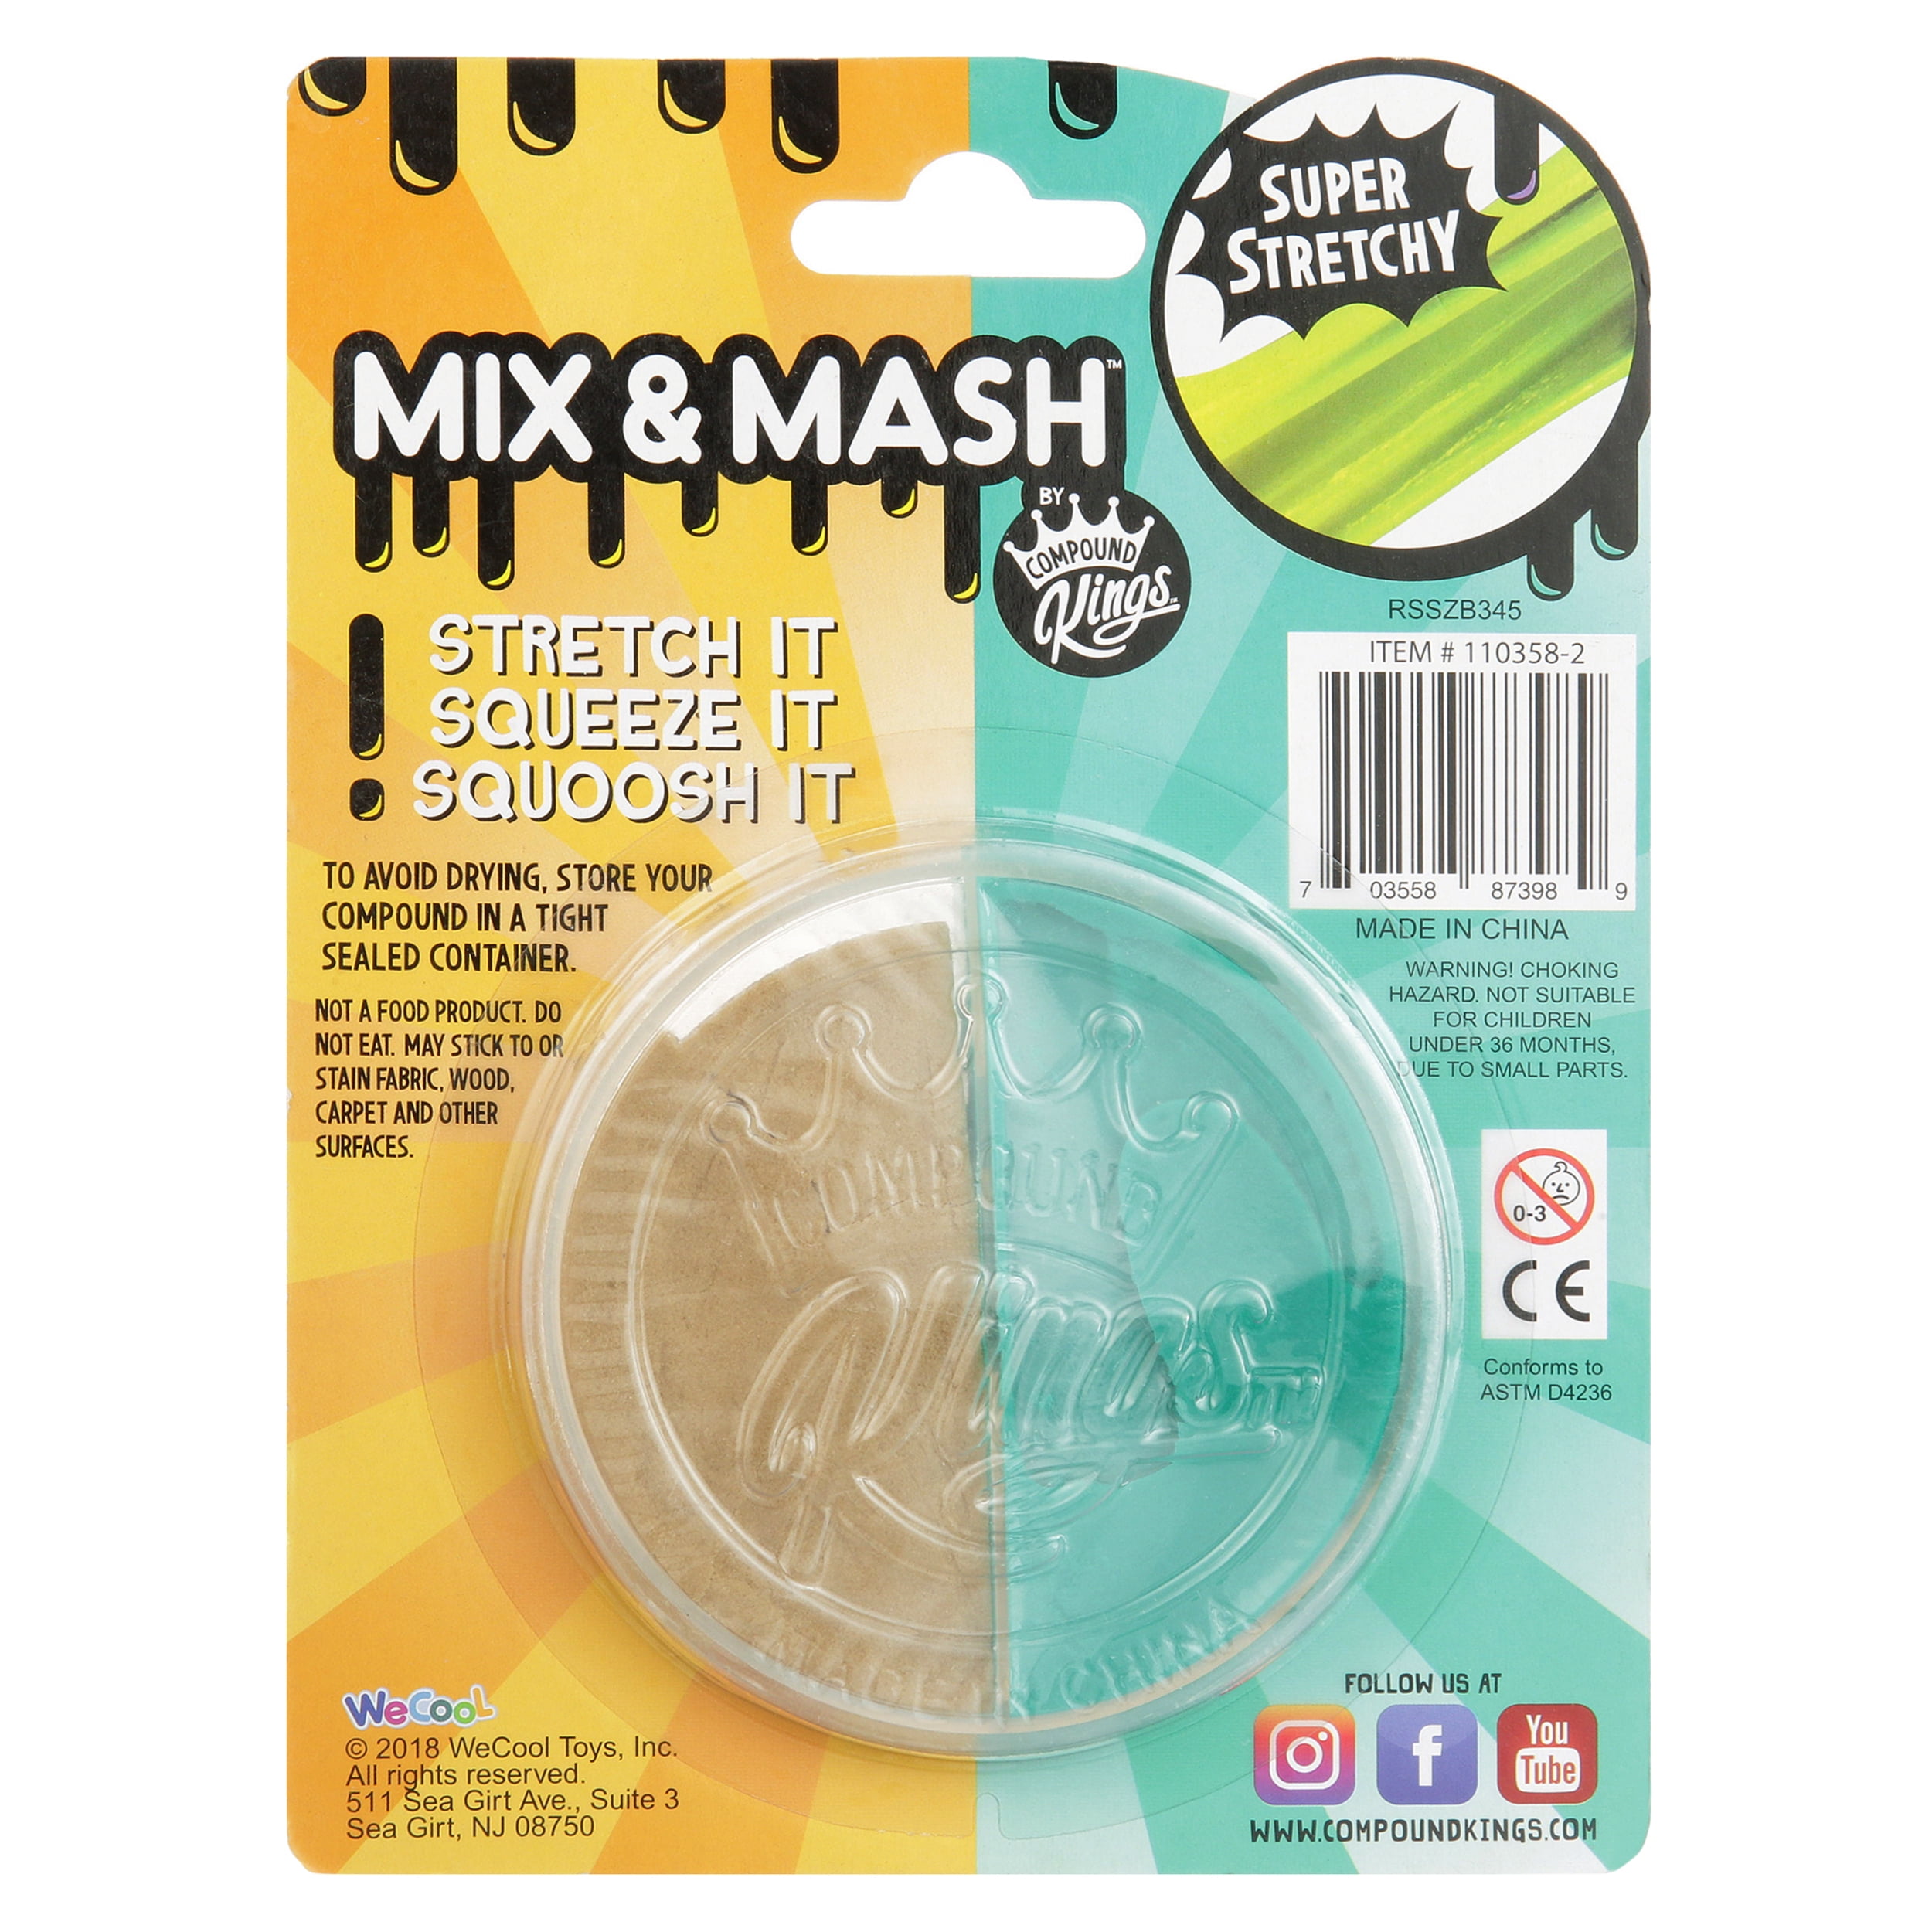 Slime 101: Everything About This Fun & Trendy Substance – Smash Slime